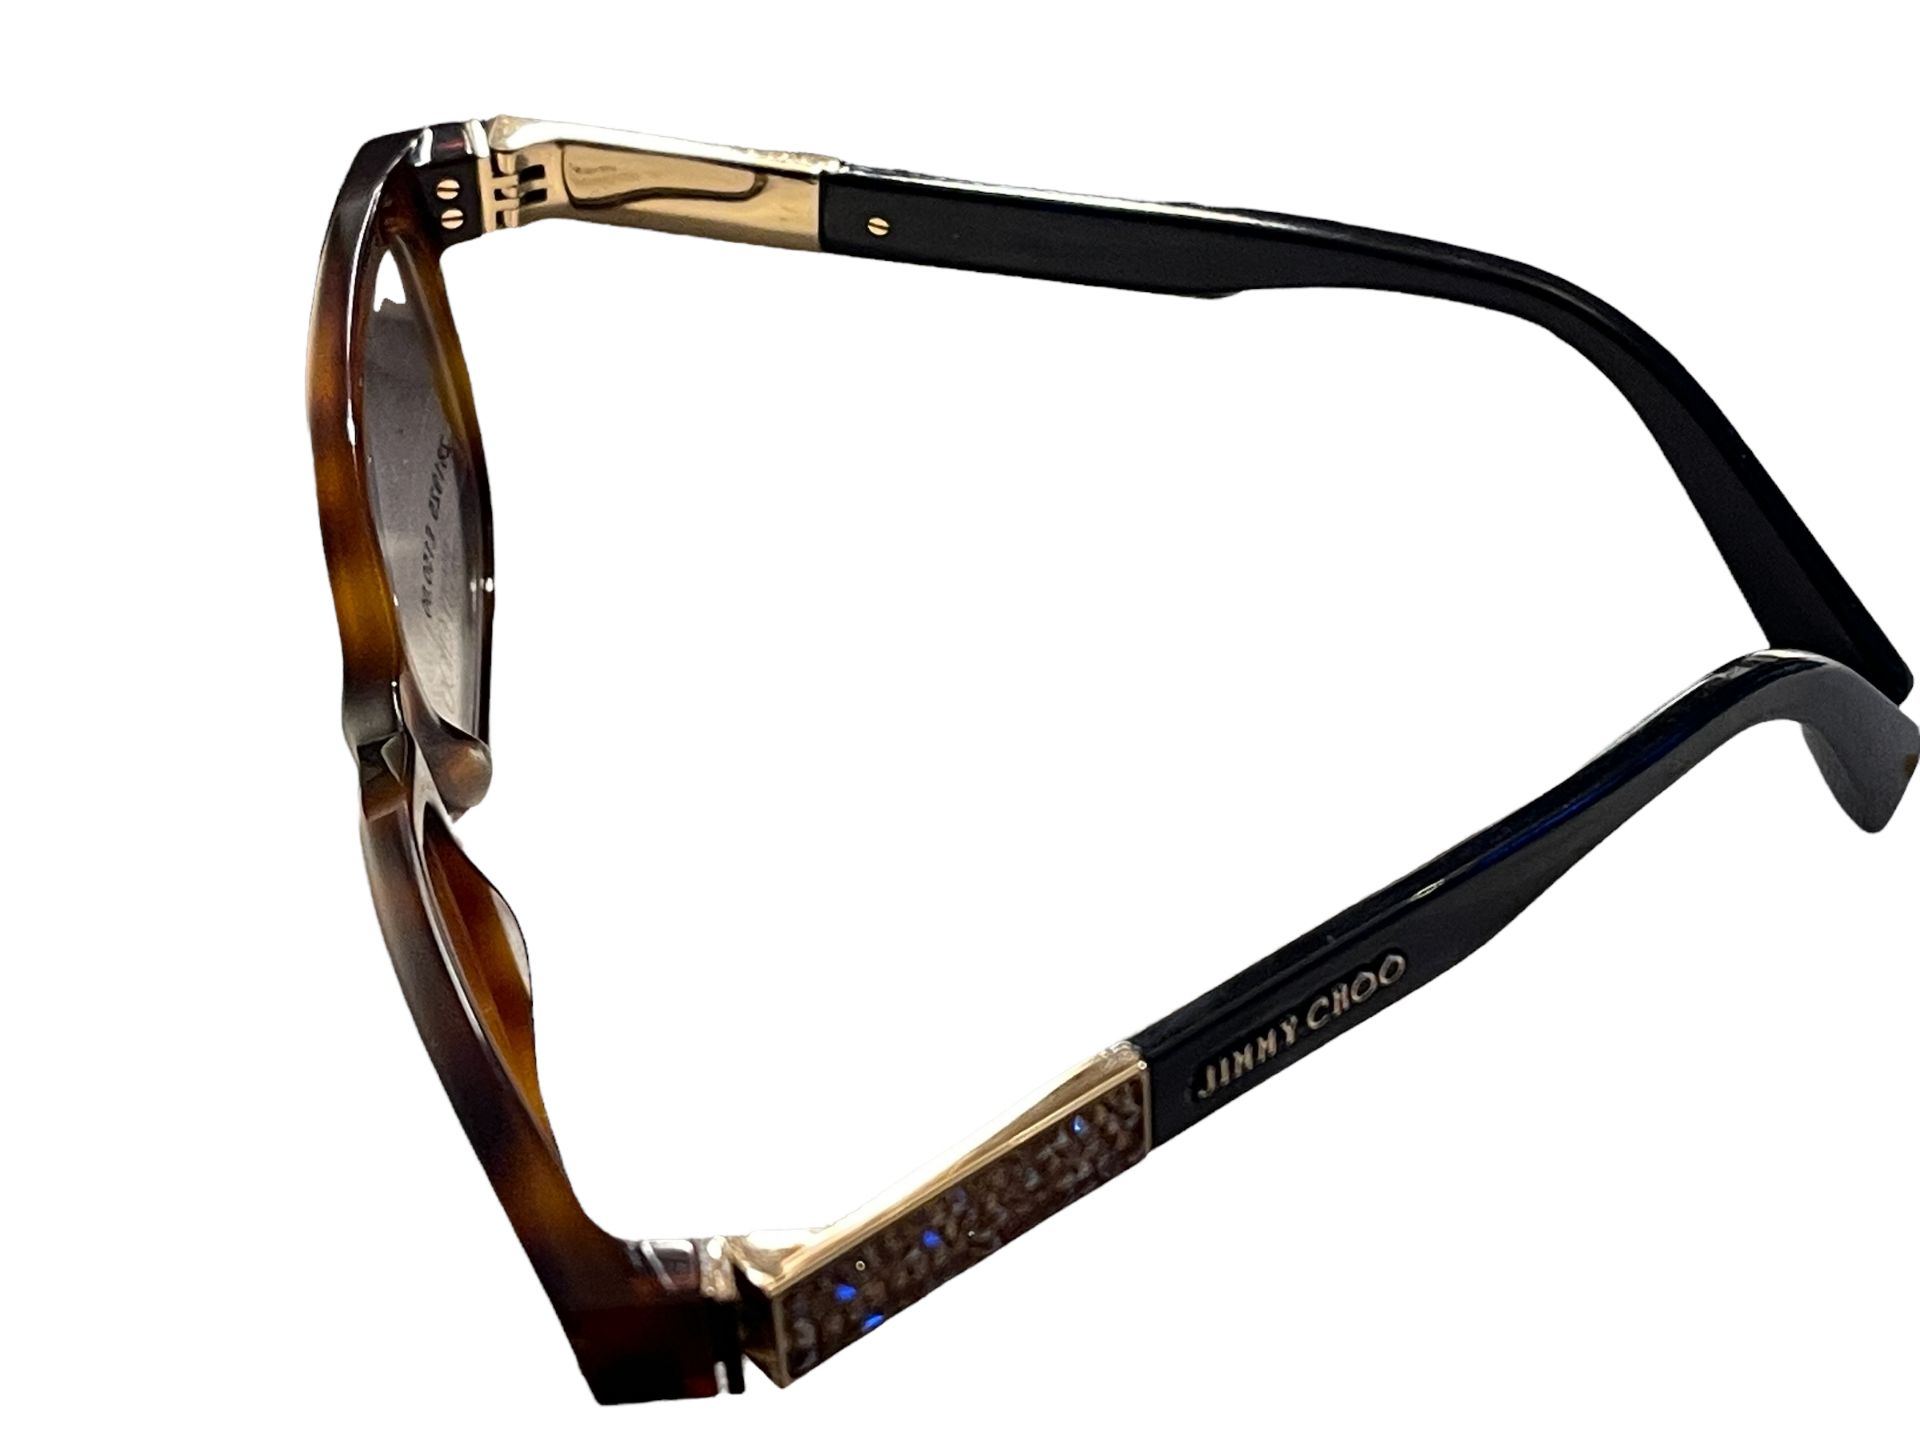 Pair of Ladies JIMMY CHOO Spectacle Frames & Case - Ex Demo or Return from our Private Jet Charte... - Image 4 of 12